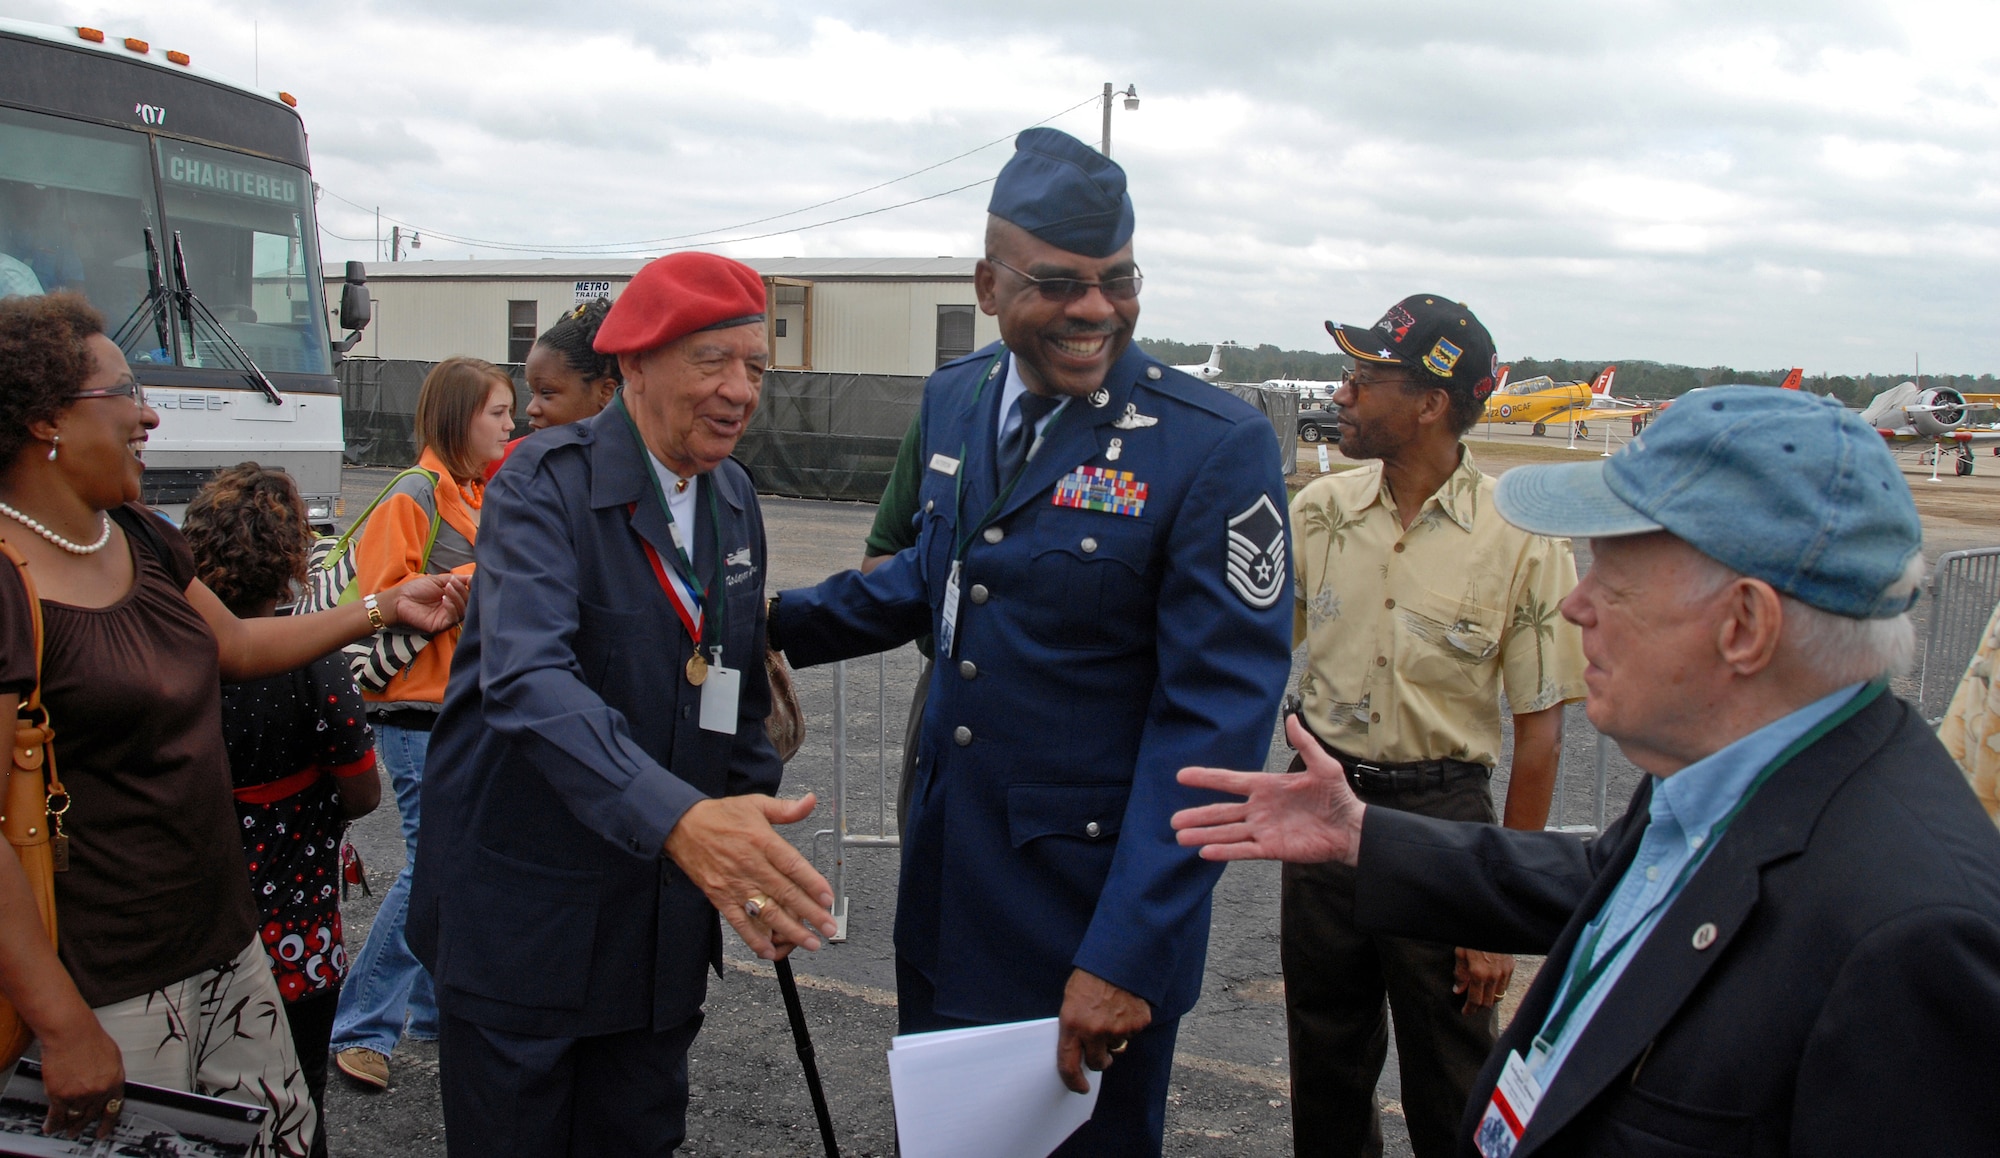 A Tuskegee Airman attending the grand opening activities exchanges pleasantries with the 908th Airlift Wing's Master Sgt. Ronnie Patterson and a well-wisher at grand opening activities for the Tuskegee Airmen National Historic Site at Moton Field, Tuskegee, Ala. Oct. 10. (U.S. Air Force Photo by Lt. Col. Jerry Lobb)         